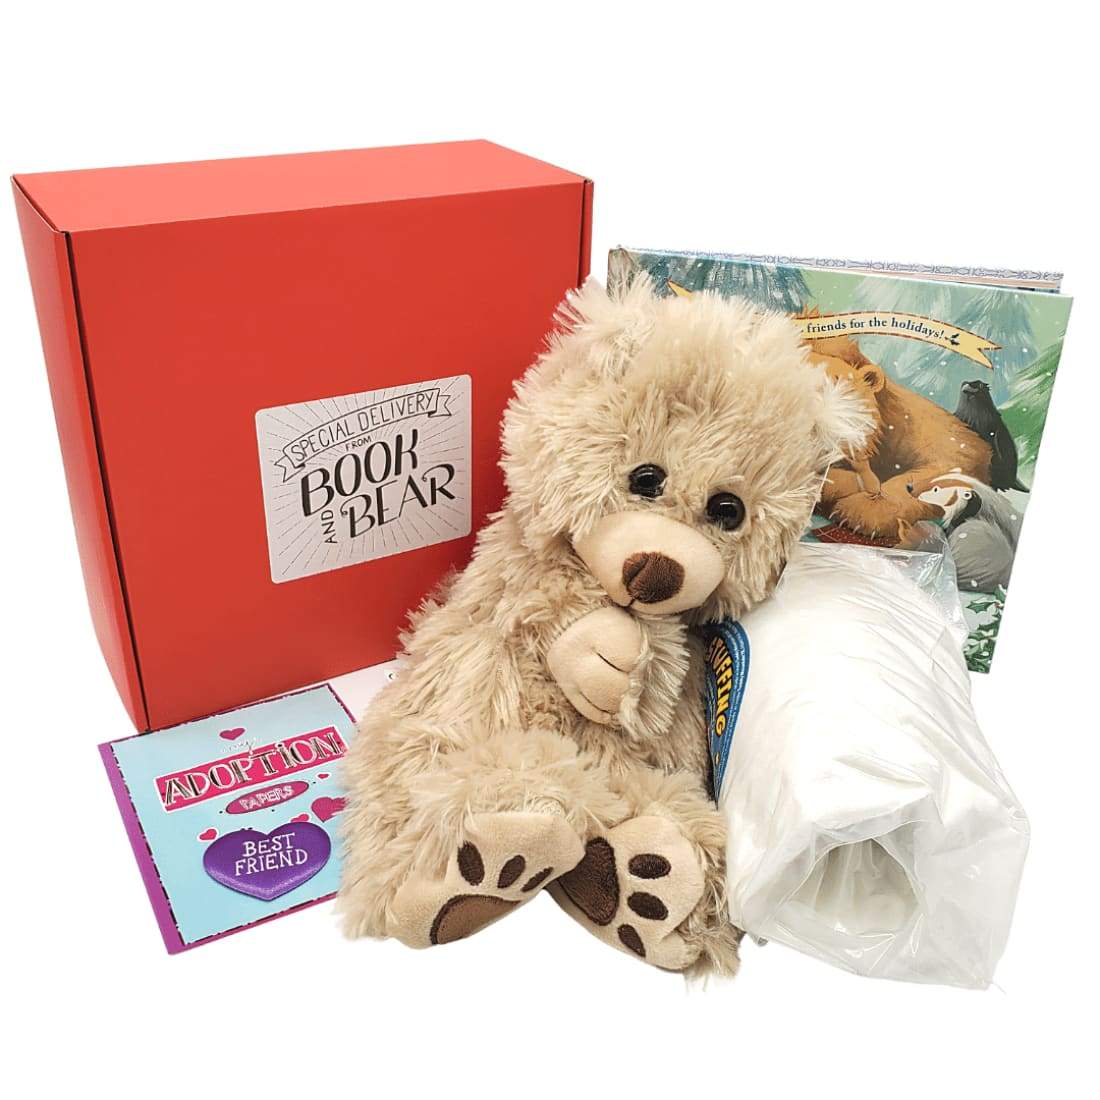 Christmas Teddy Bear Book and Bear Box with a Teddy Bear to easily build yourself, a picture book, and a Christmas gift surprise. Outside the box view on white background.